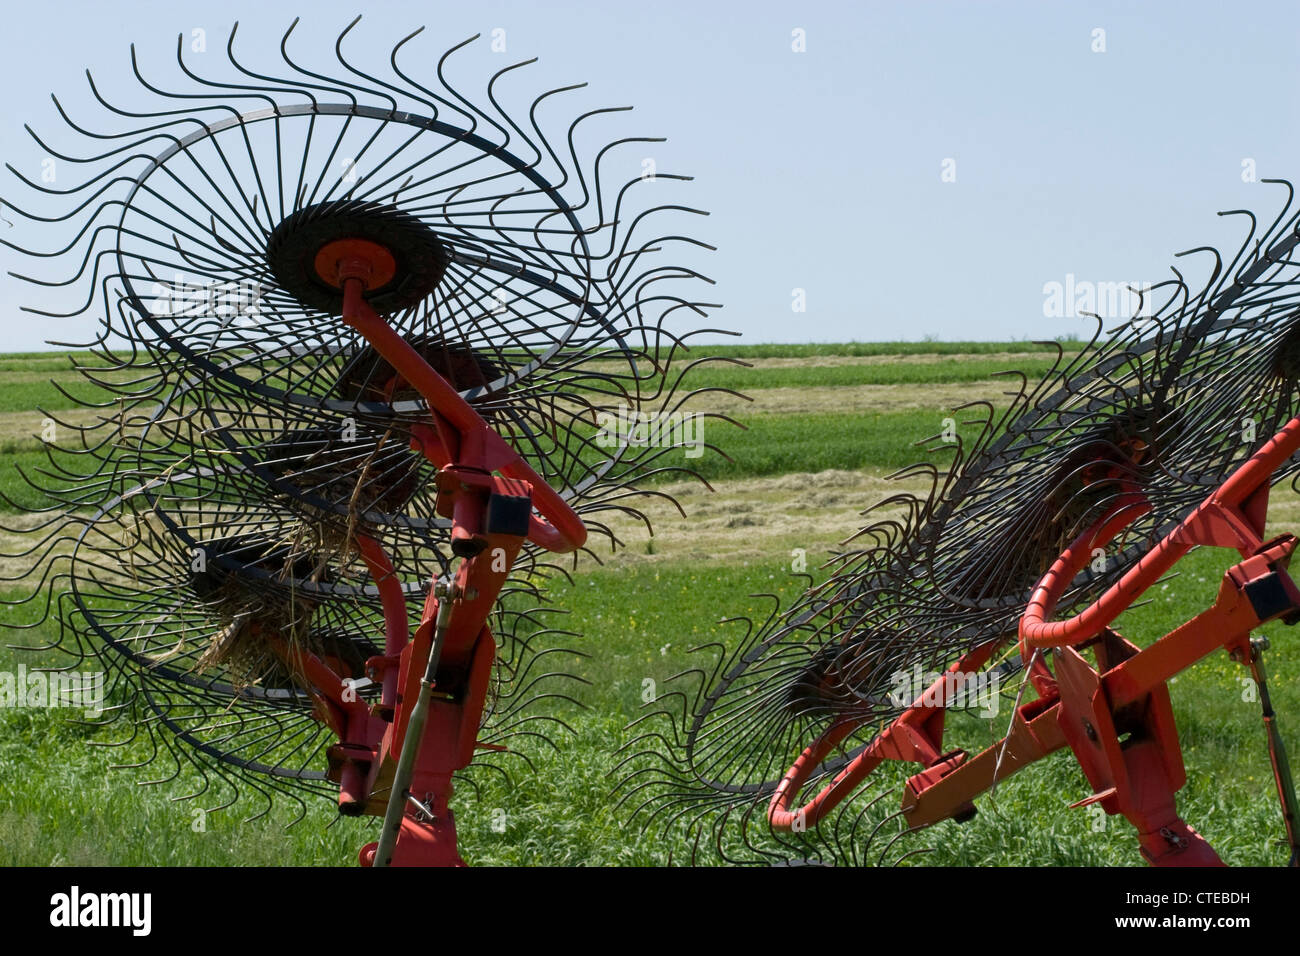 The tines of a modern hay rake show a geometric pattern against the sky. Stock Photo